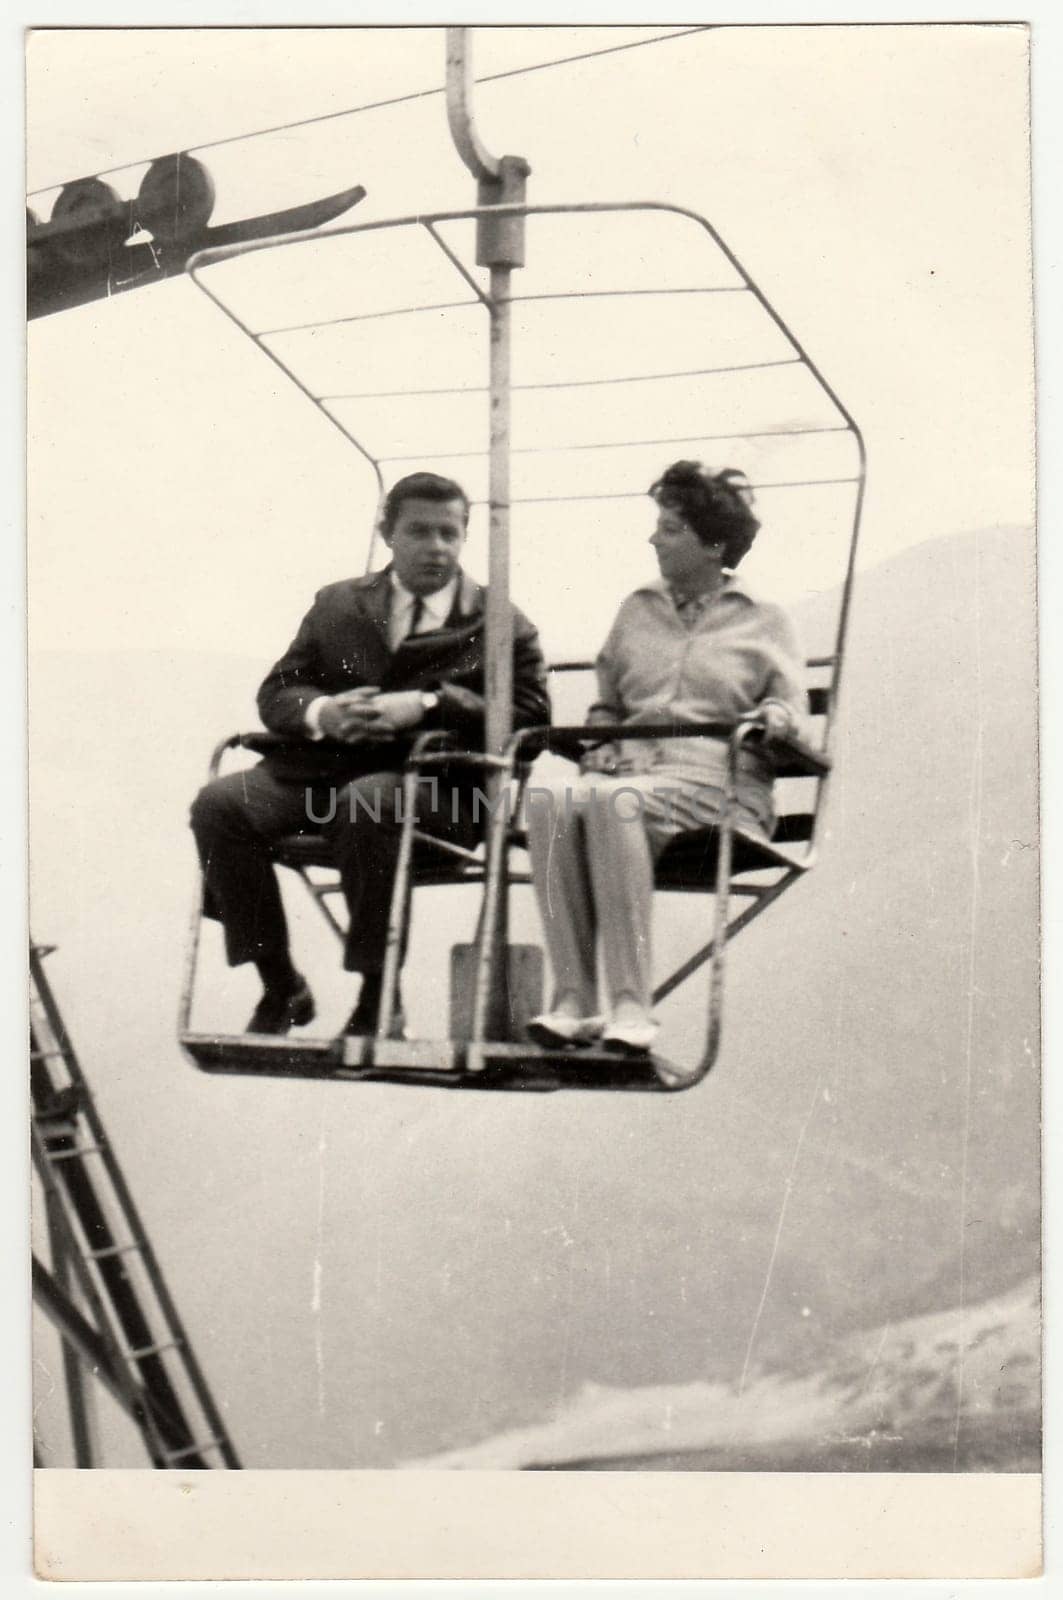 Retro photo of a marrital couple on a chair lift, 1970s. by roman_nerud